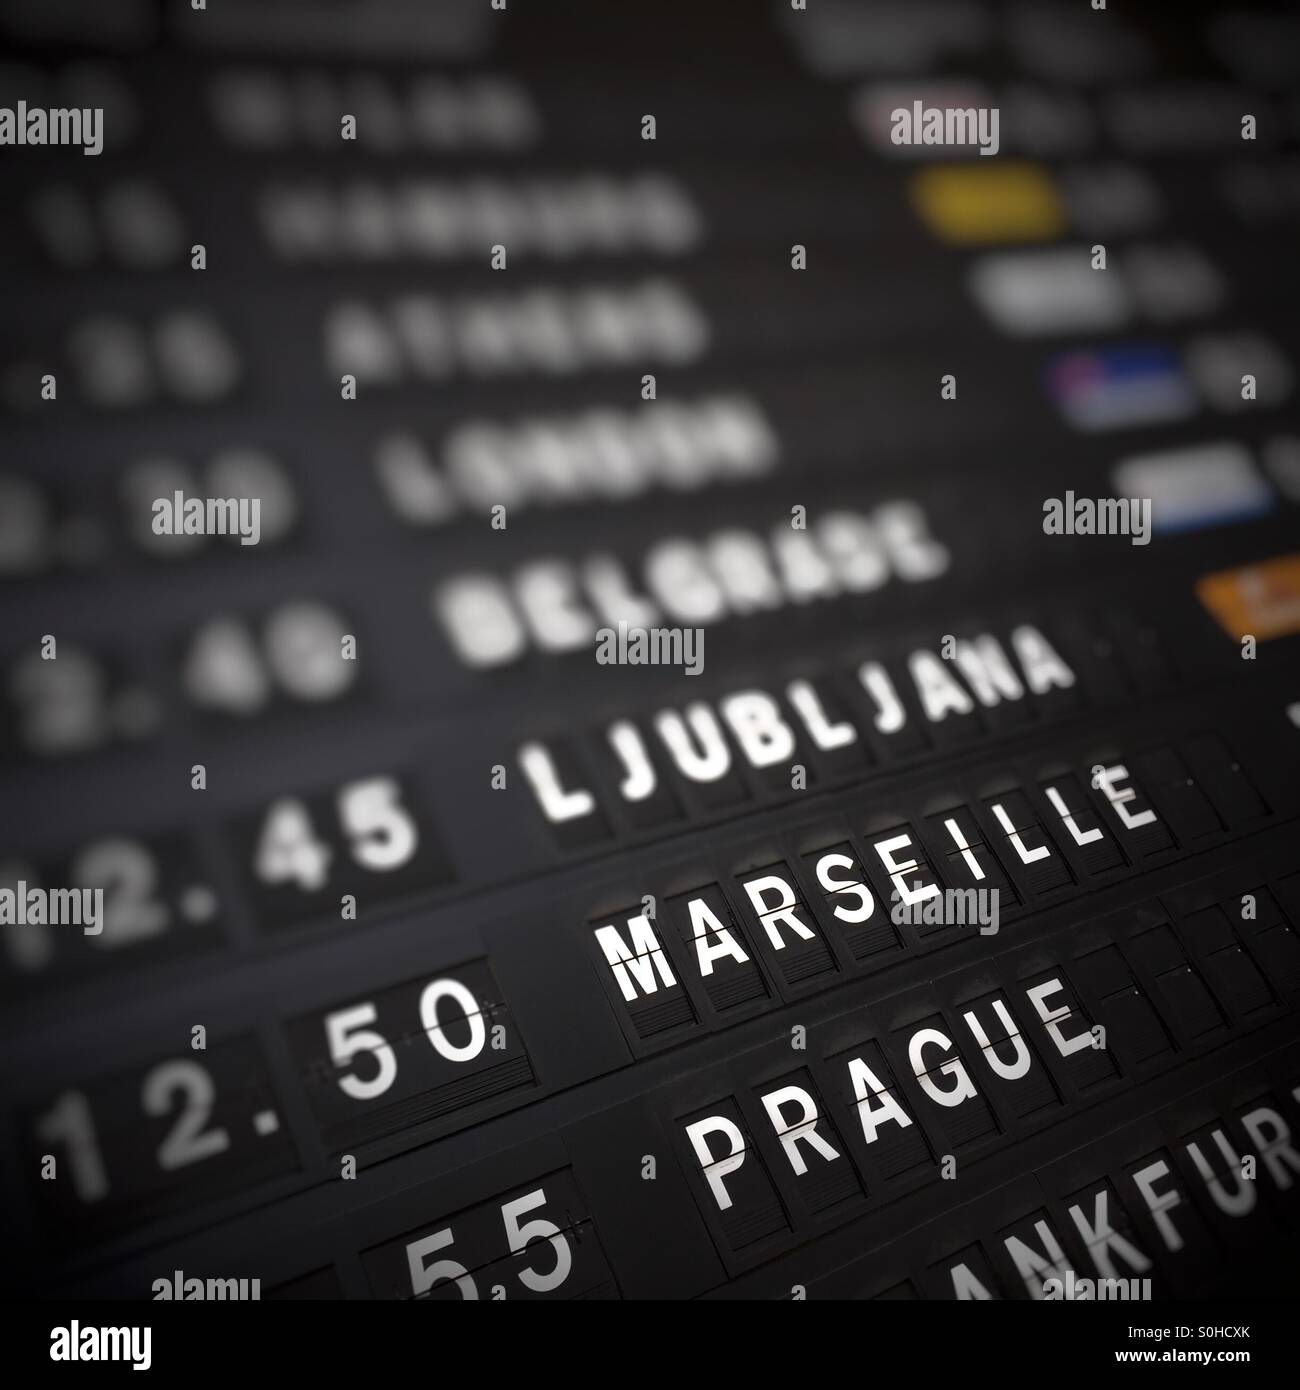 A flight departure board shows flight times for European cities such as Marsielle, Prague, and Belgrade. Stock Photo